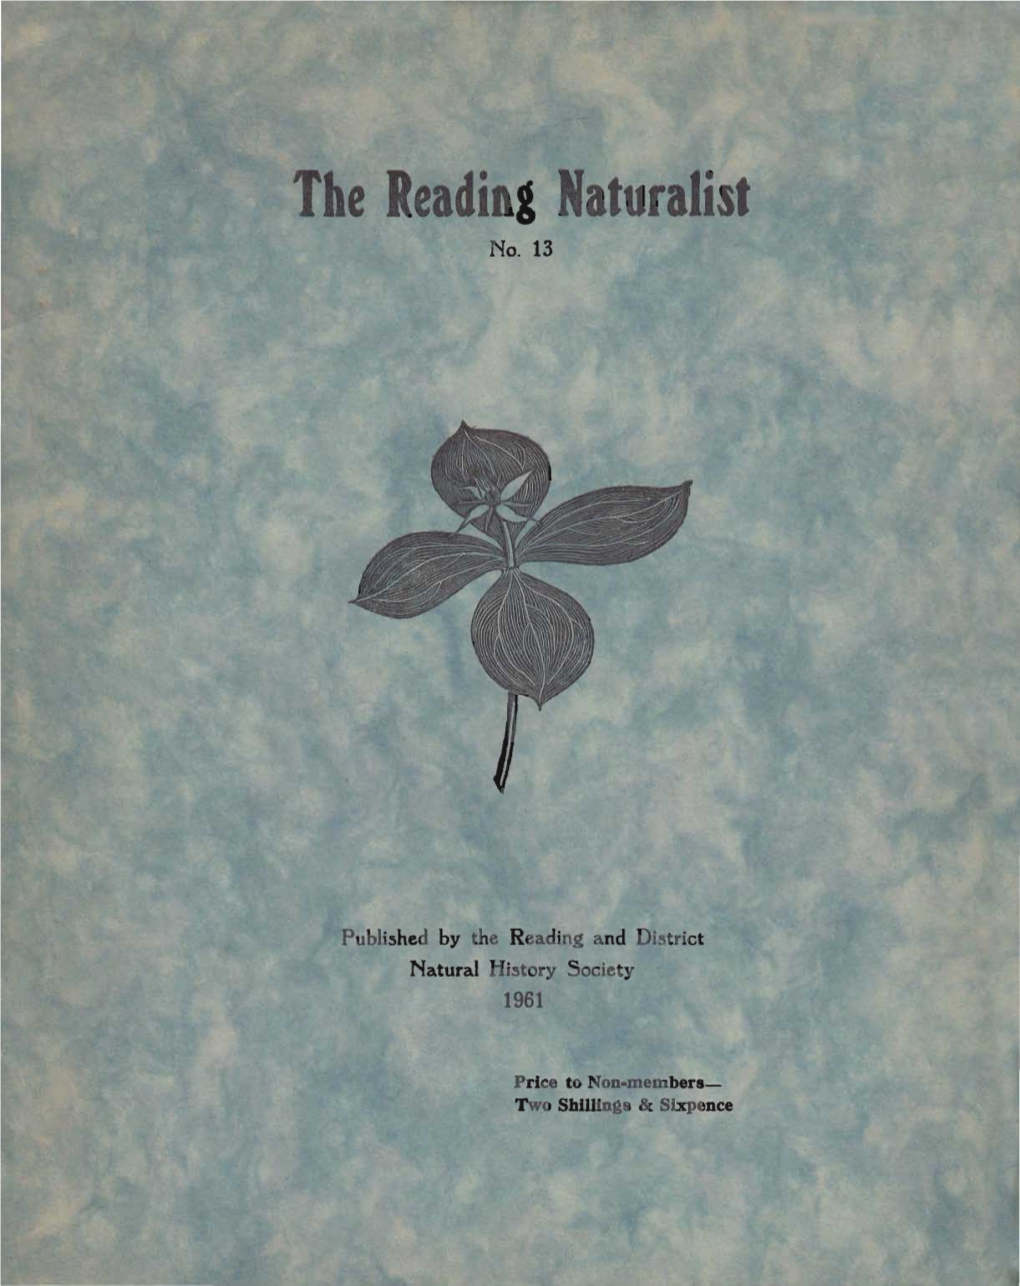 The Reading Naturalist No